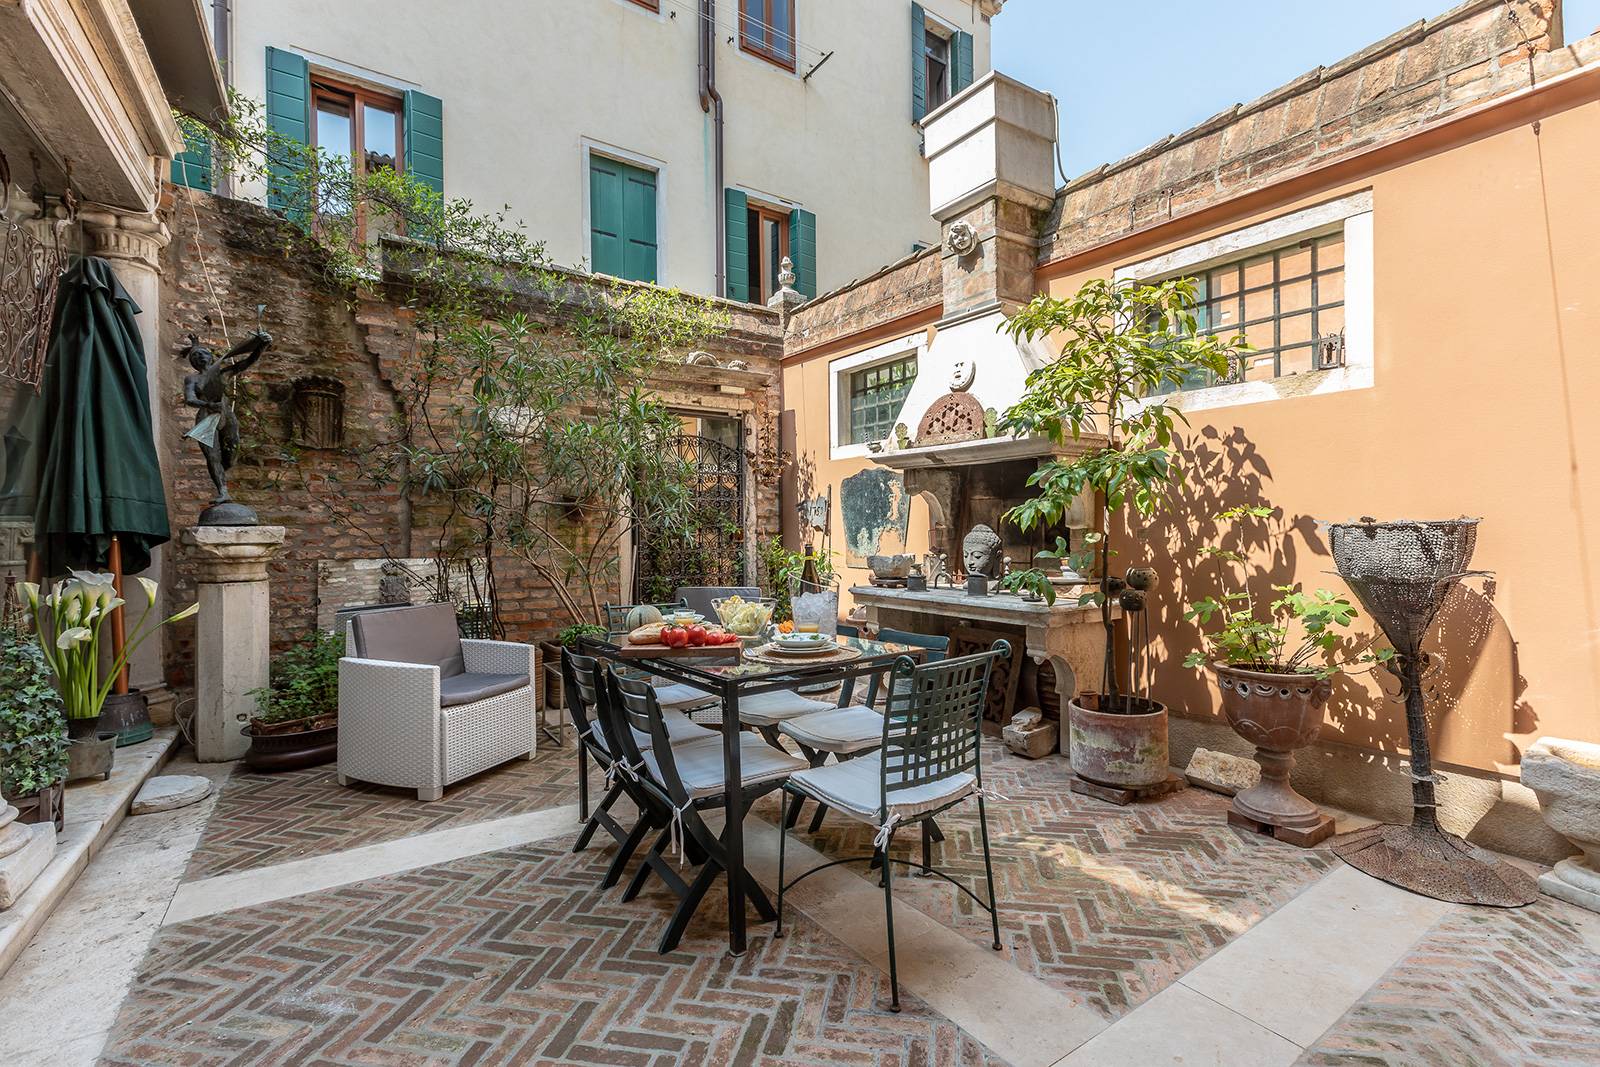 the courtyard is so cozy that you can spend the entire day here!